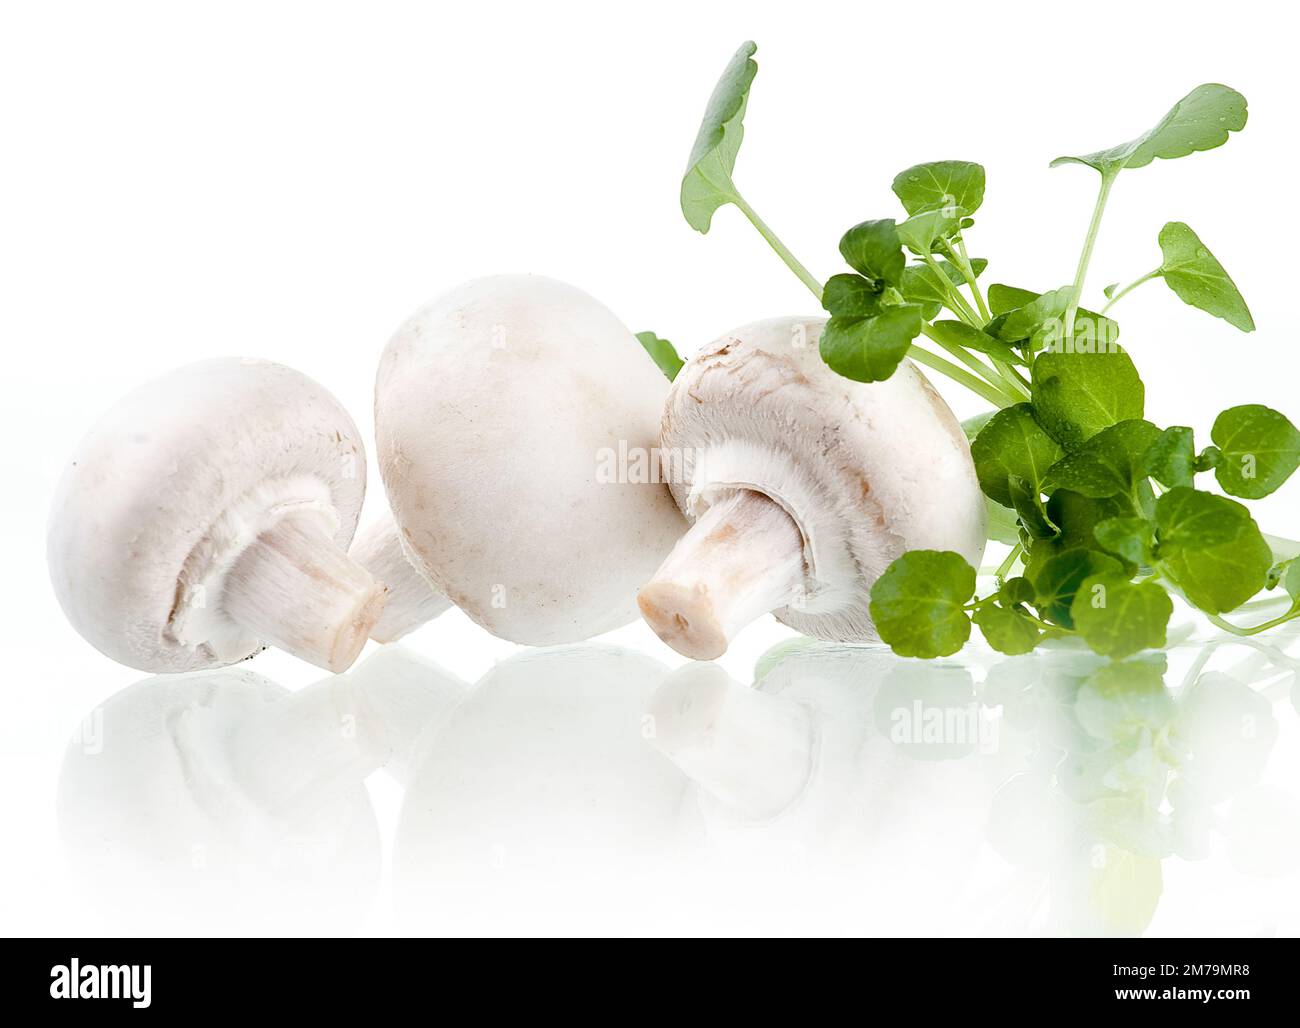 Fresh white mushrooms piled on a white background with fresh herbs in the background Stock Photo